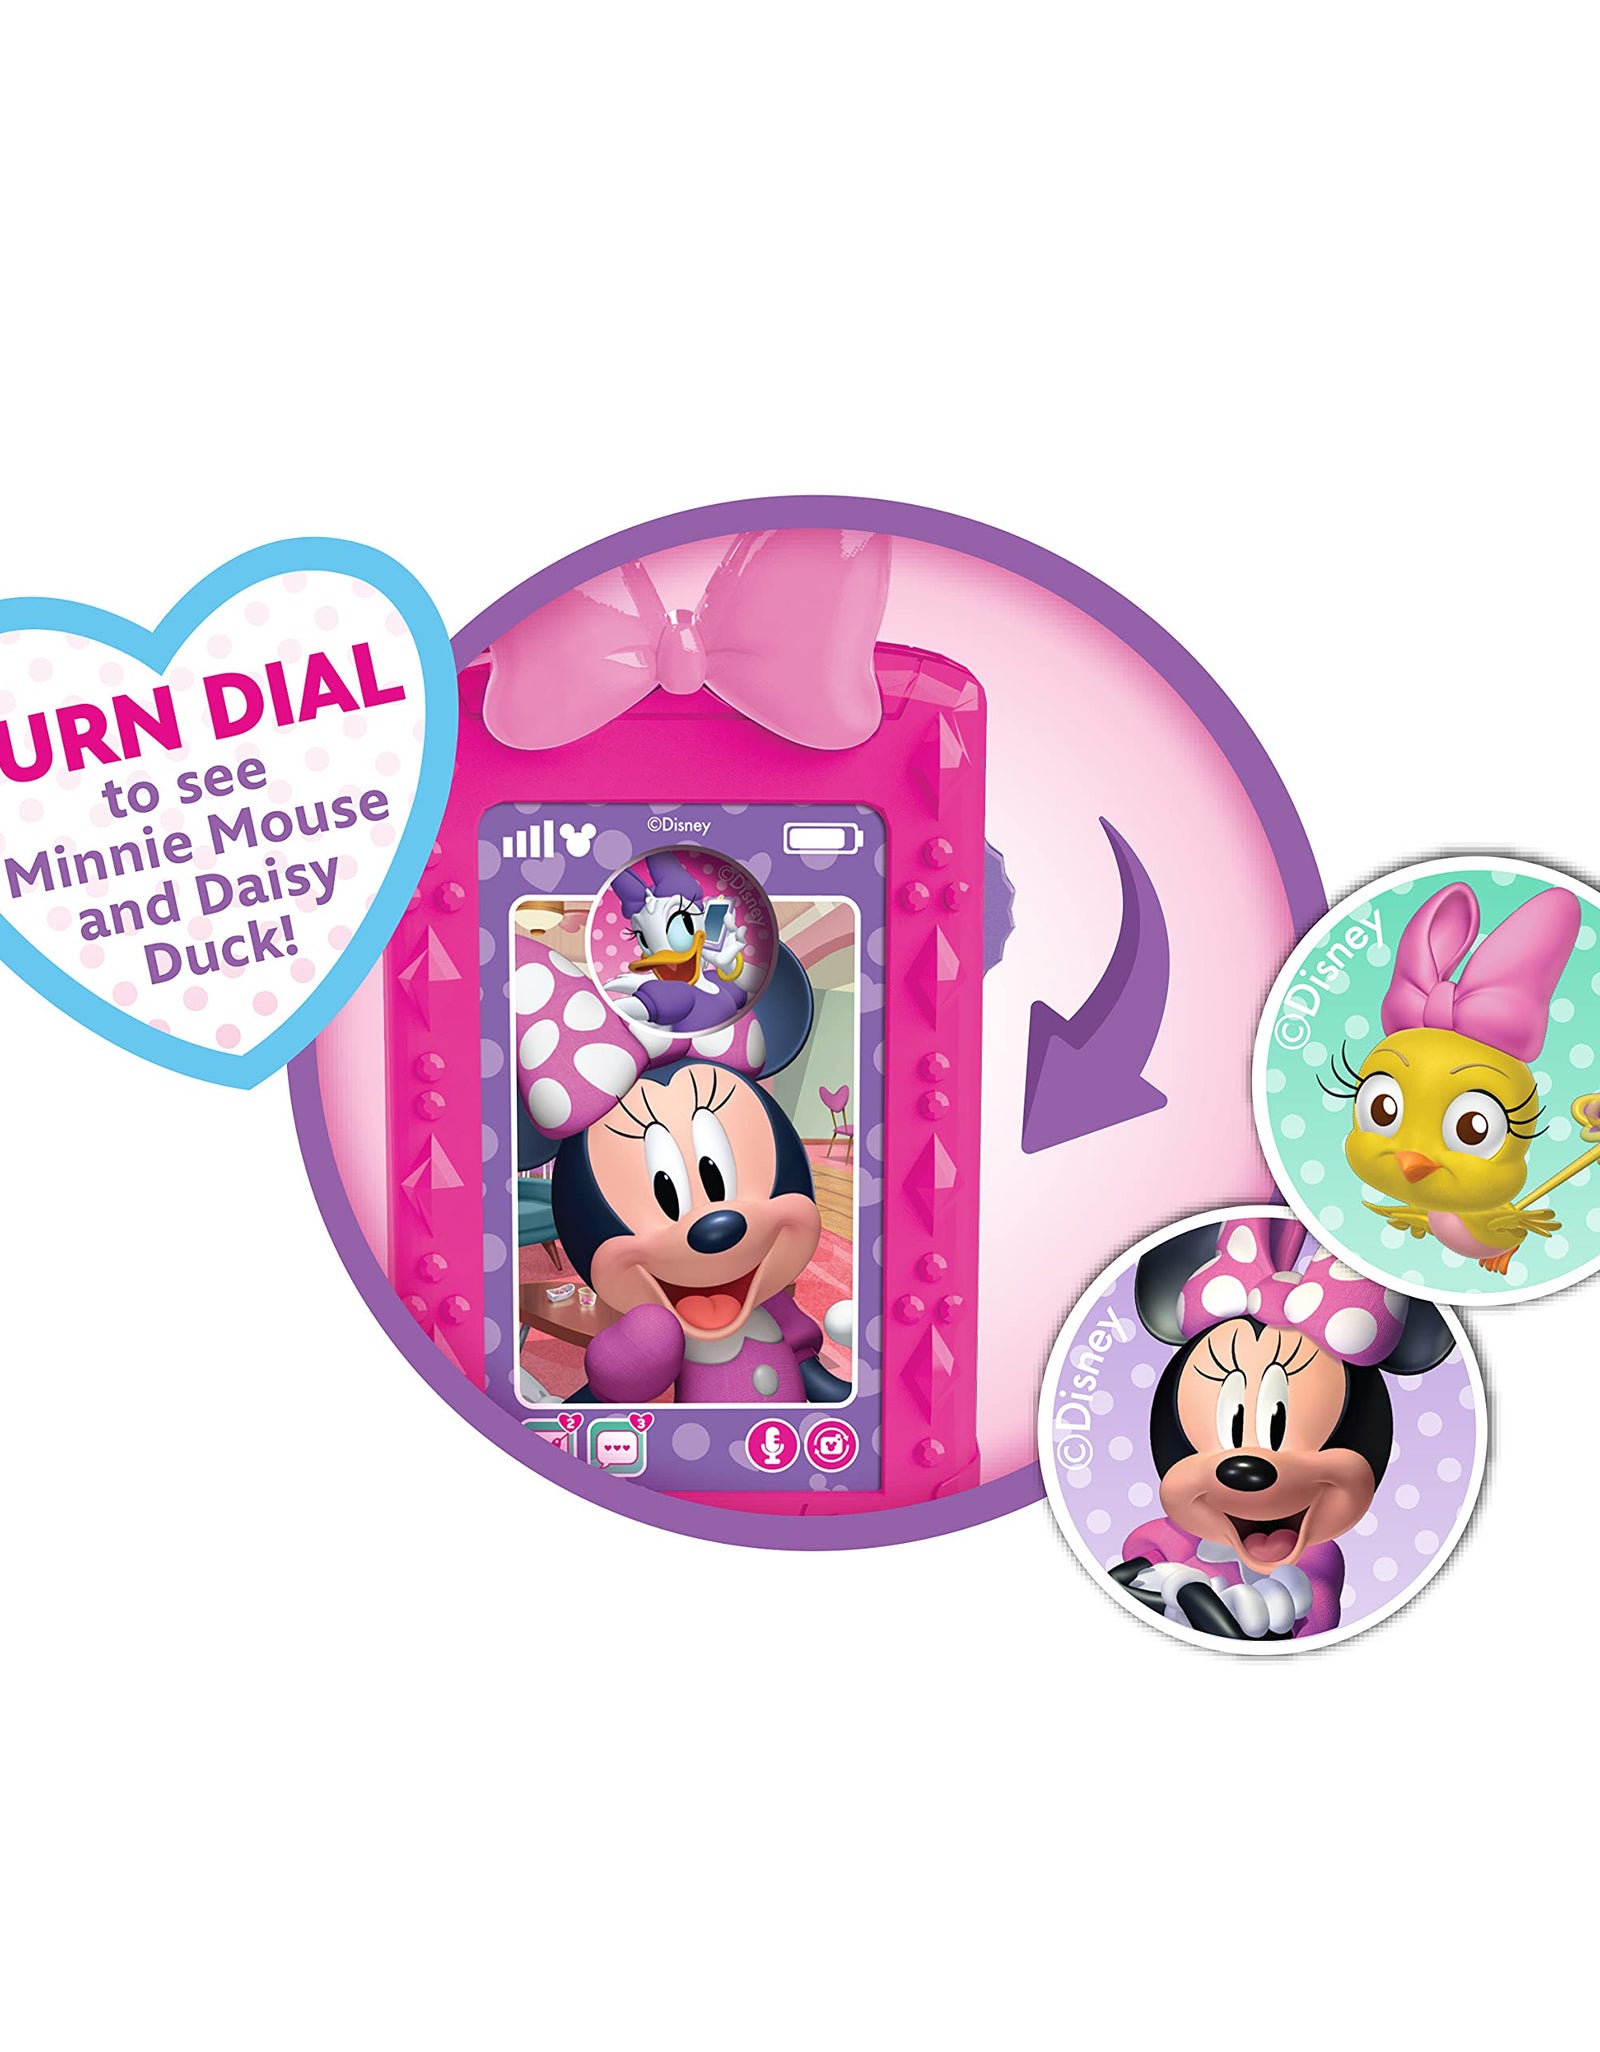 Disney Junior Minnie Mouse Bowfabulous Bag Set, 9 Piece Pretend Play Purse with Lights and Sounds Cell Phone, Sunglasses, and Accessories, by Just Play